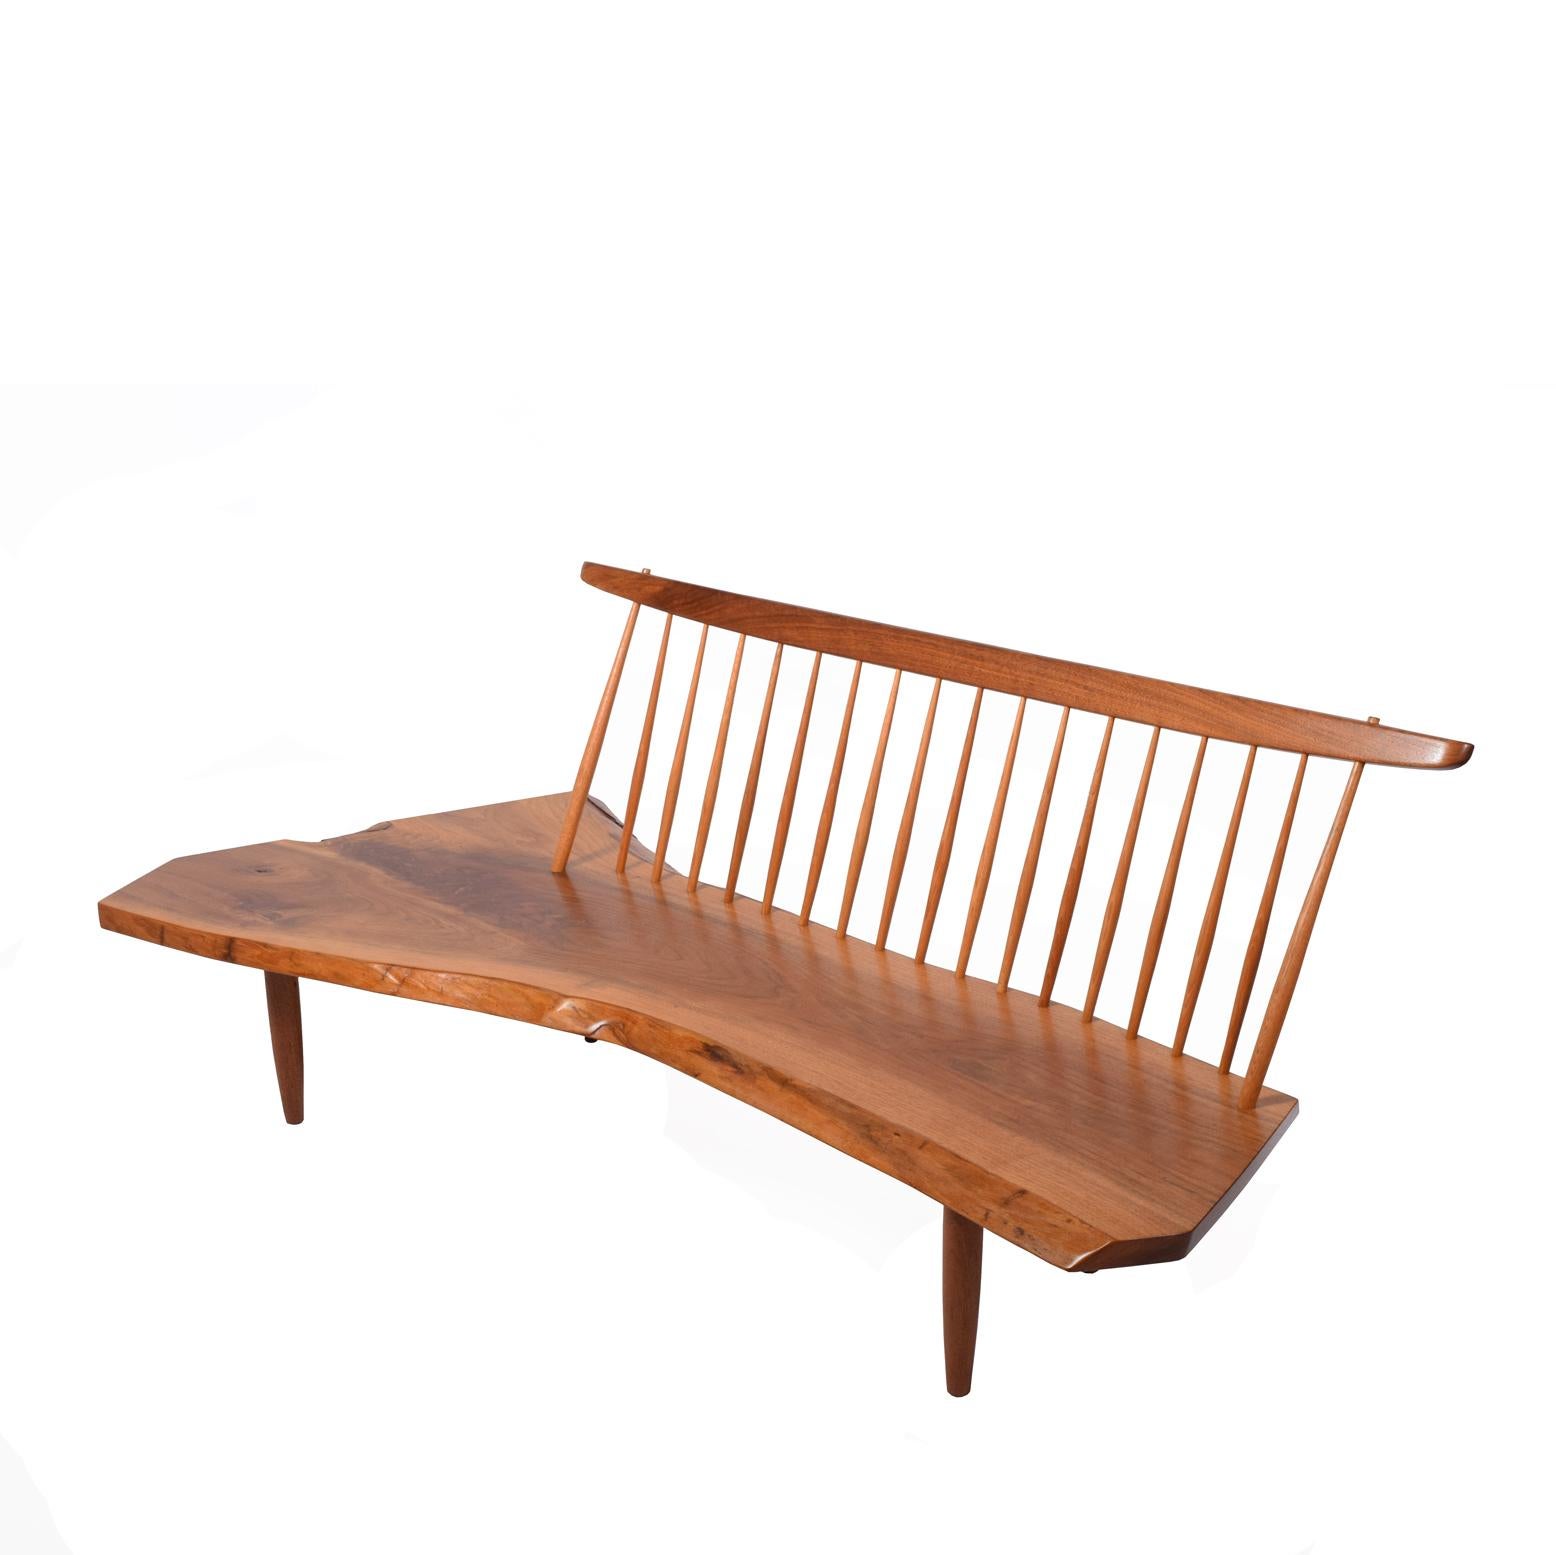 Solid plank of black walnut seat signed George Nakashima and date plus client name original owner inquired direct from the original owner collection professor John Fairey,
Original drawing available.